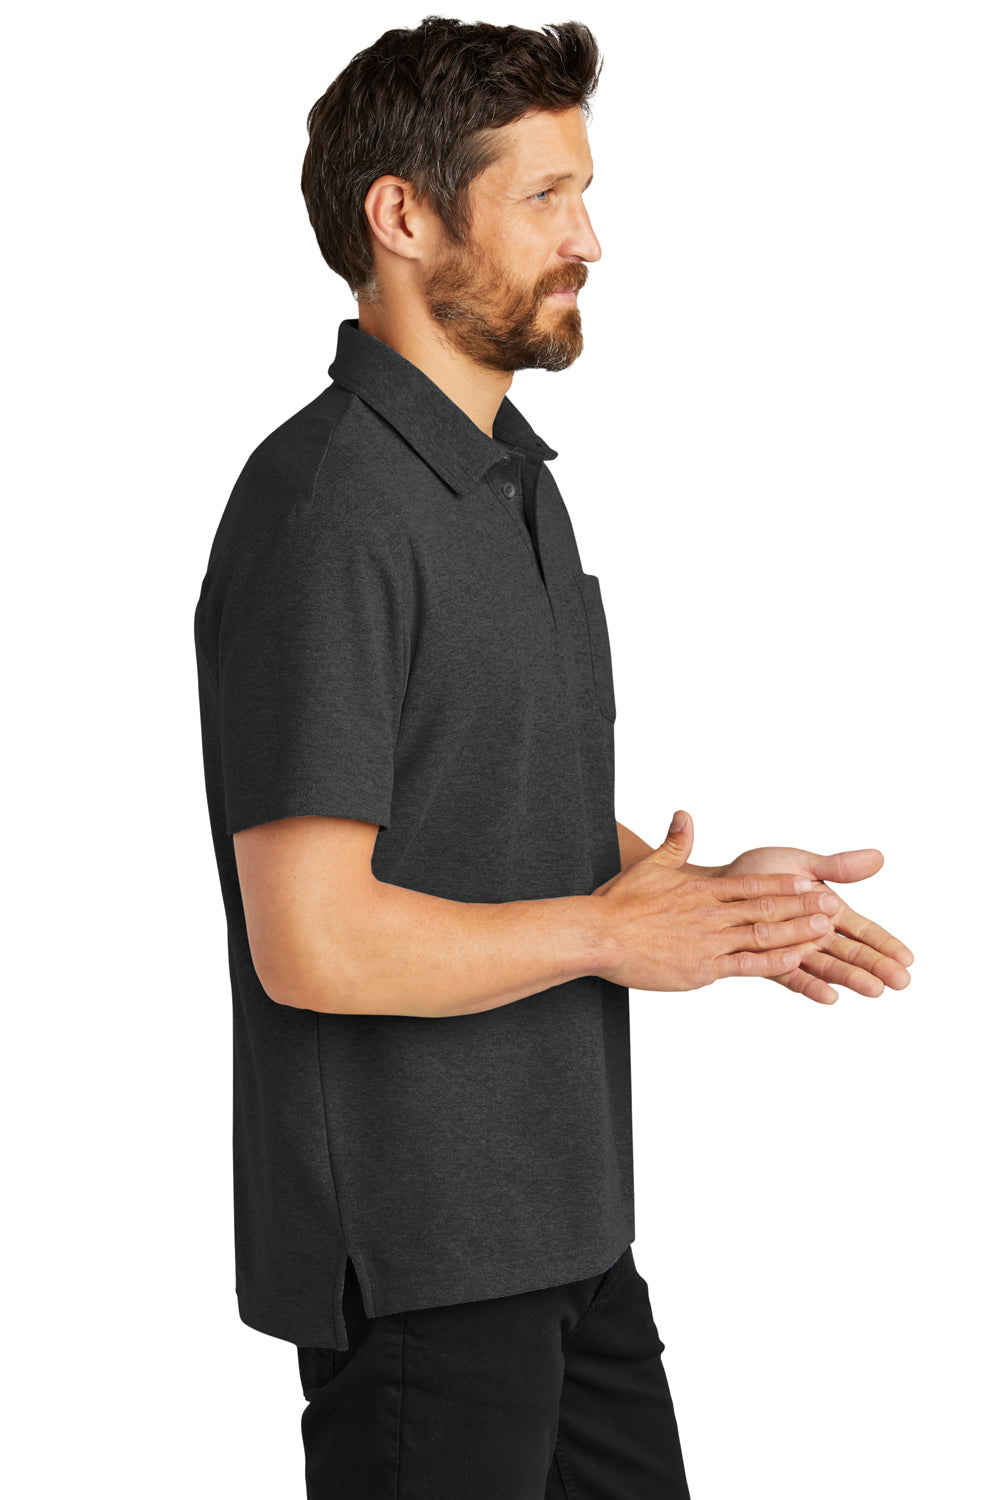 Port Authority K868 Mens C-FREE Pique Short Sleeve Polo Shirt w/ Pocket Heather Charcoal Grey Side